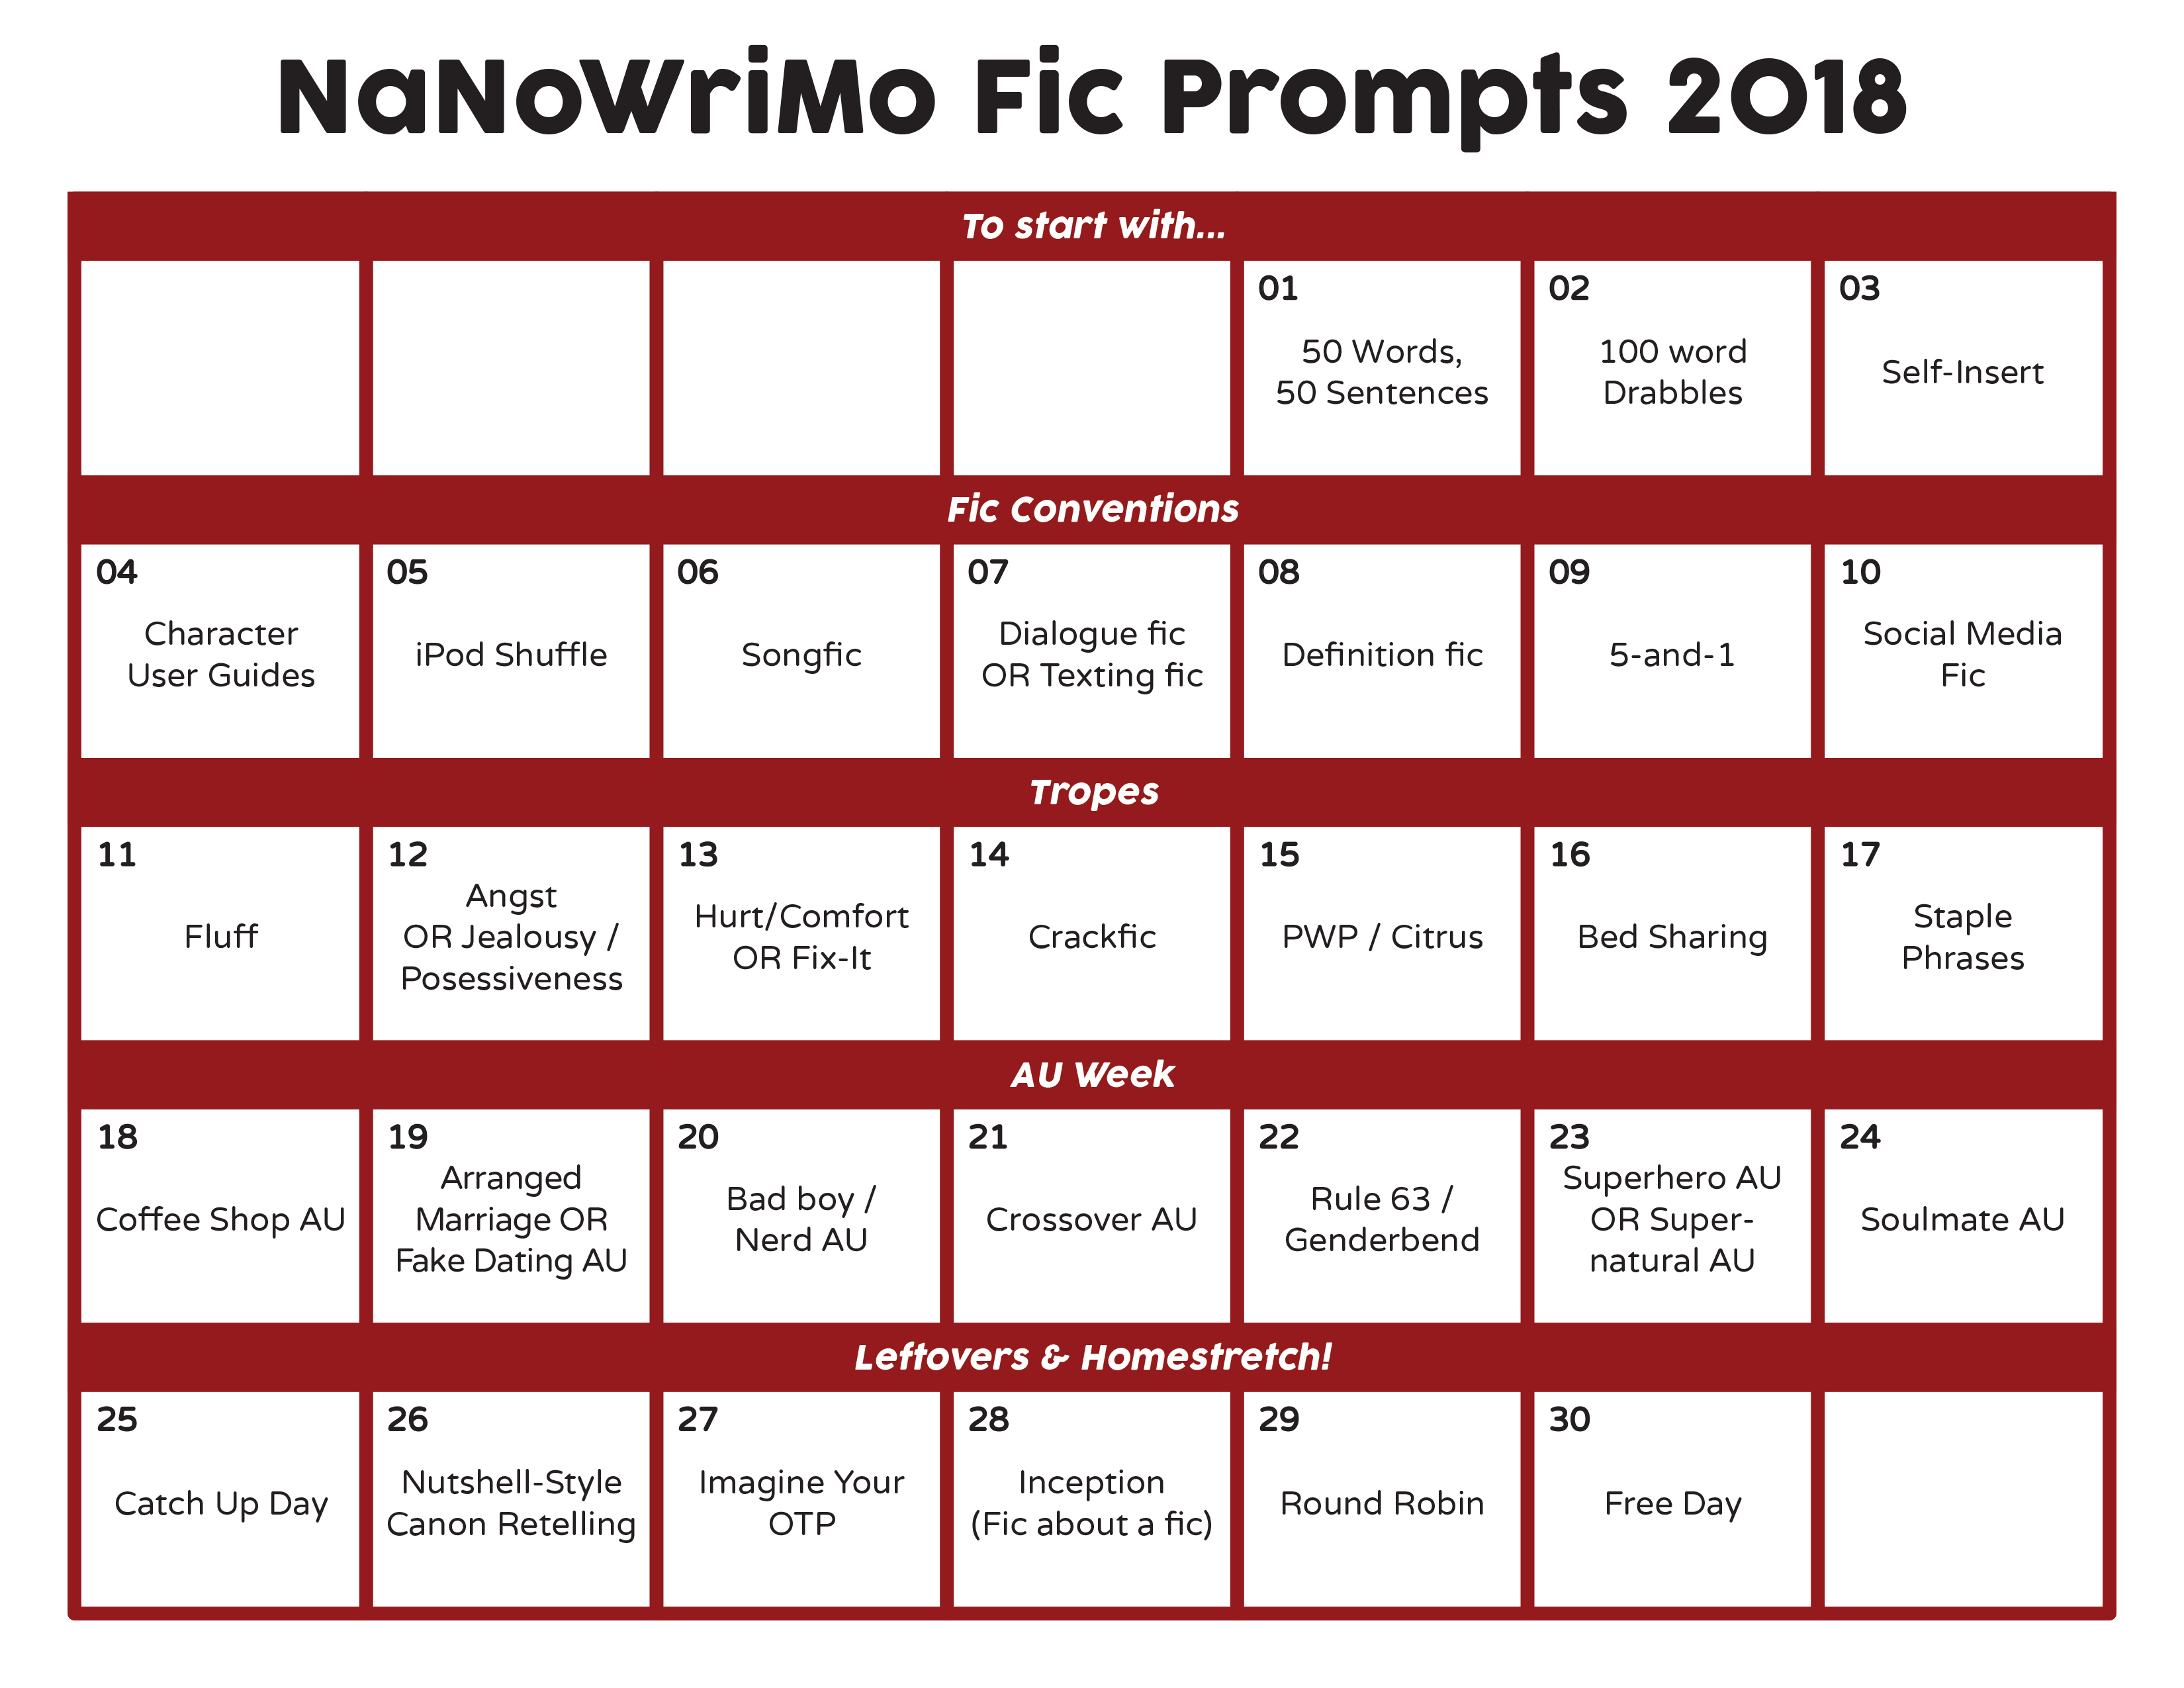 A November 2018 calendar with fanfic prompts written for each day.